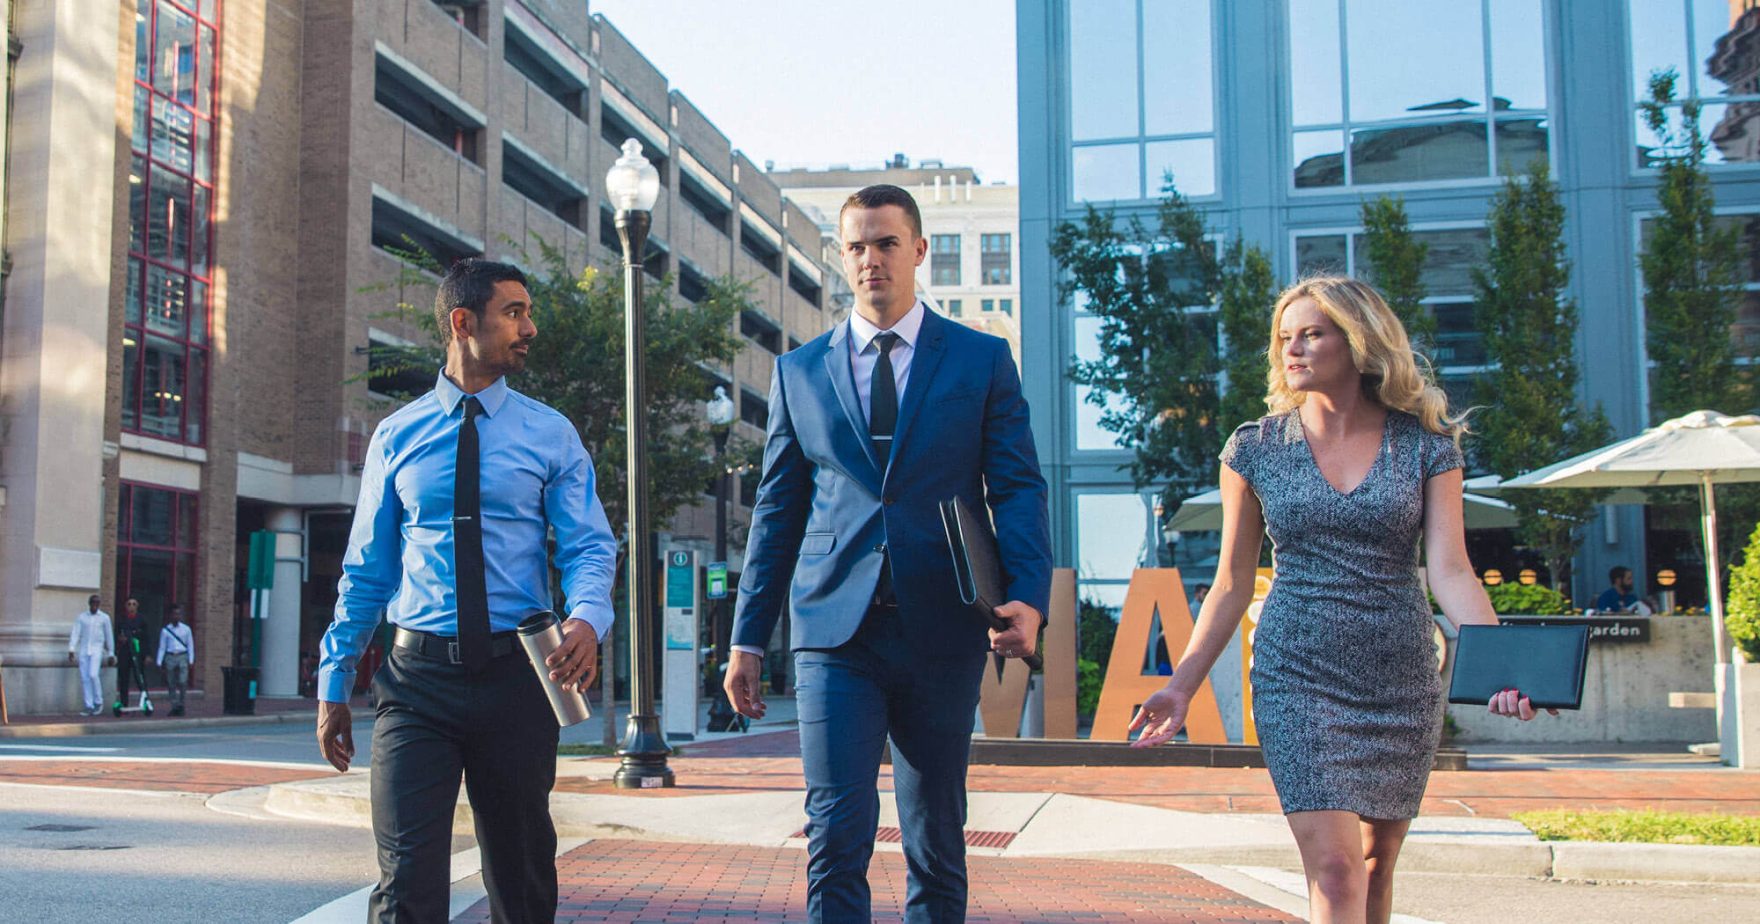 Three executives crossing a street: Regent's online MBA program has been recognized as number 1 for return on investment (ROI).